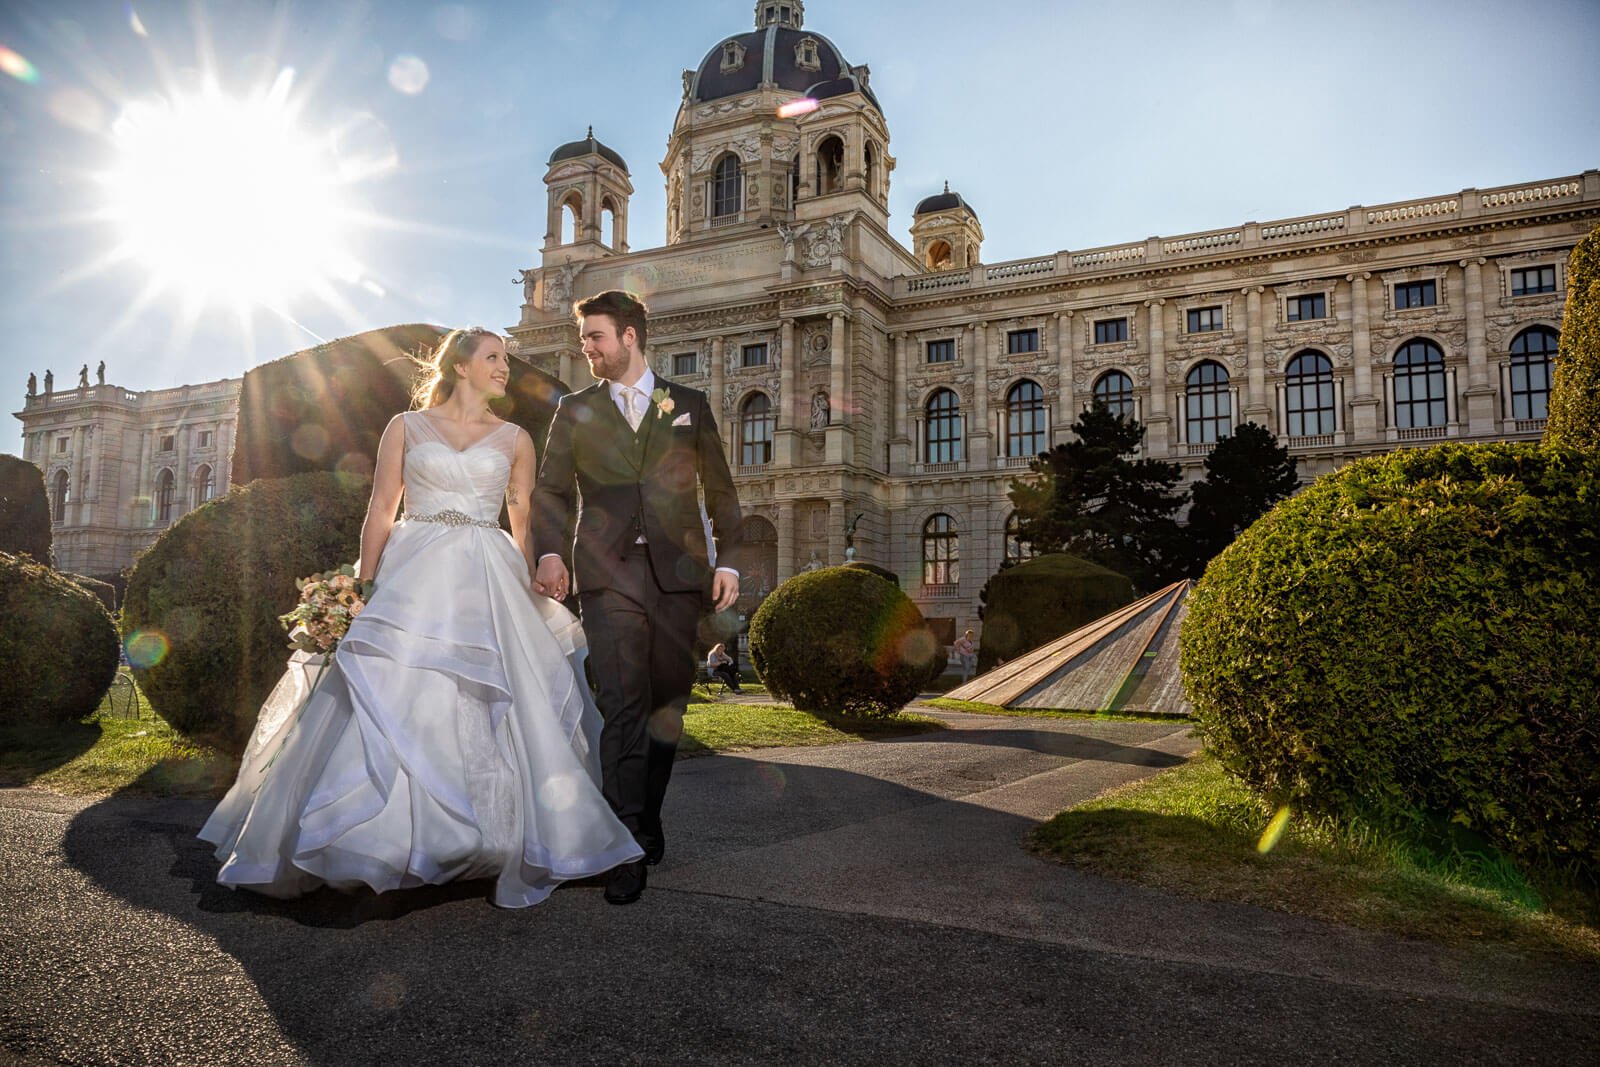 Wedding photographer Vienna - Kunsthistorisches Museum - Bridal couple in the foreground and low sun